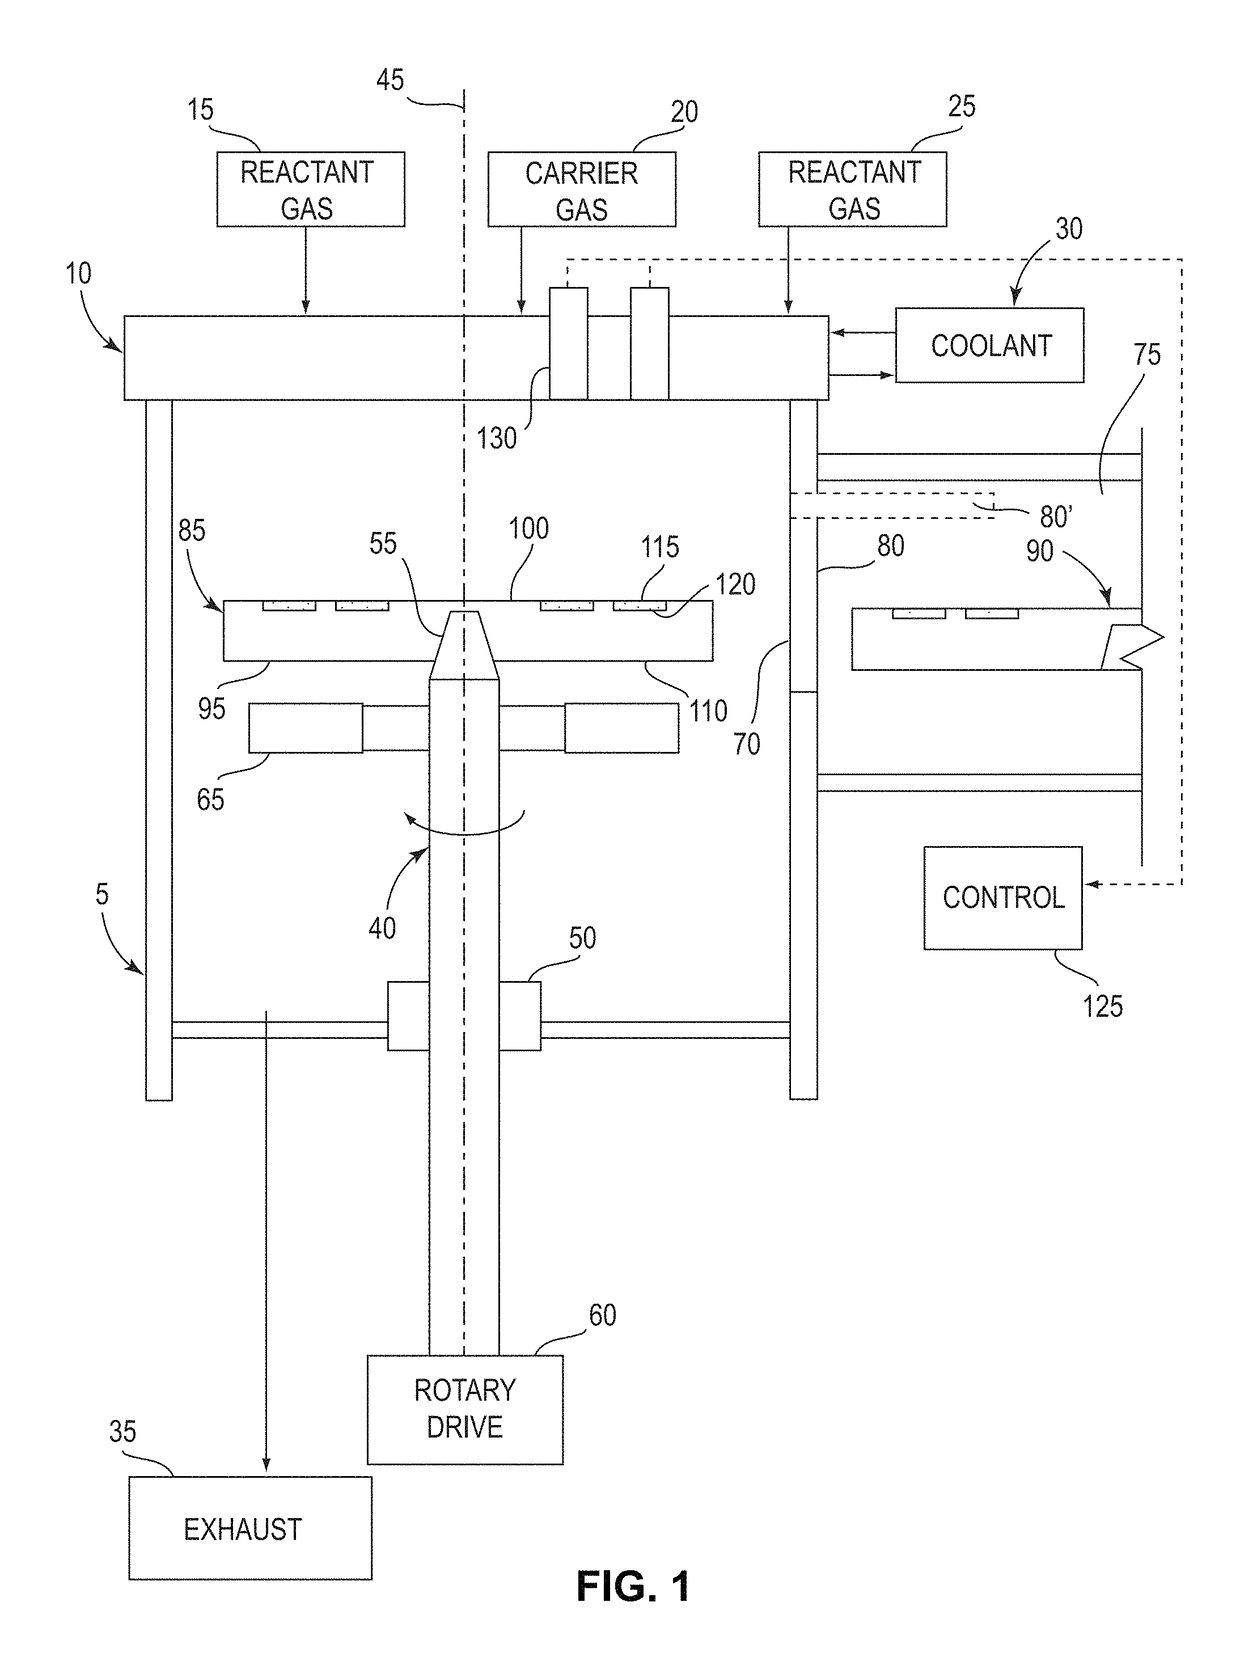 Wafer carrier having thermal cover for chemical vapor deposition systems